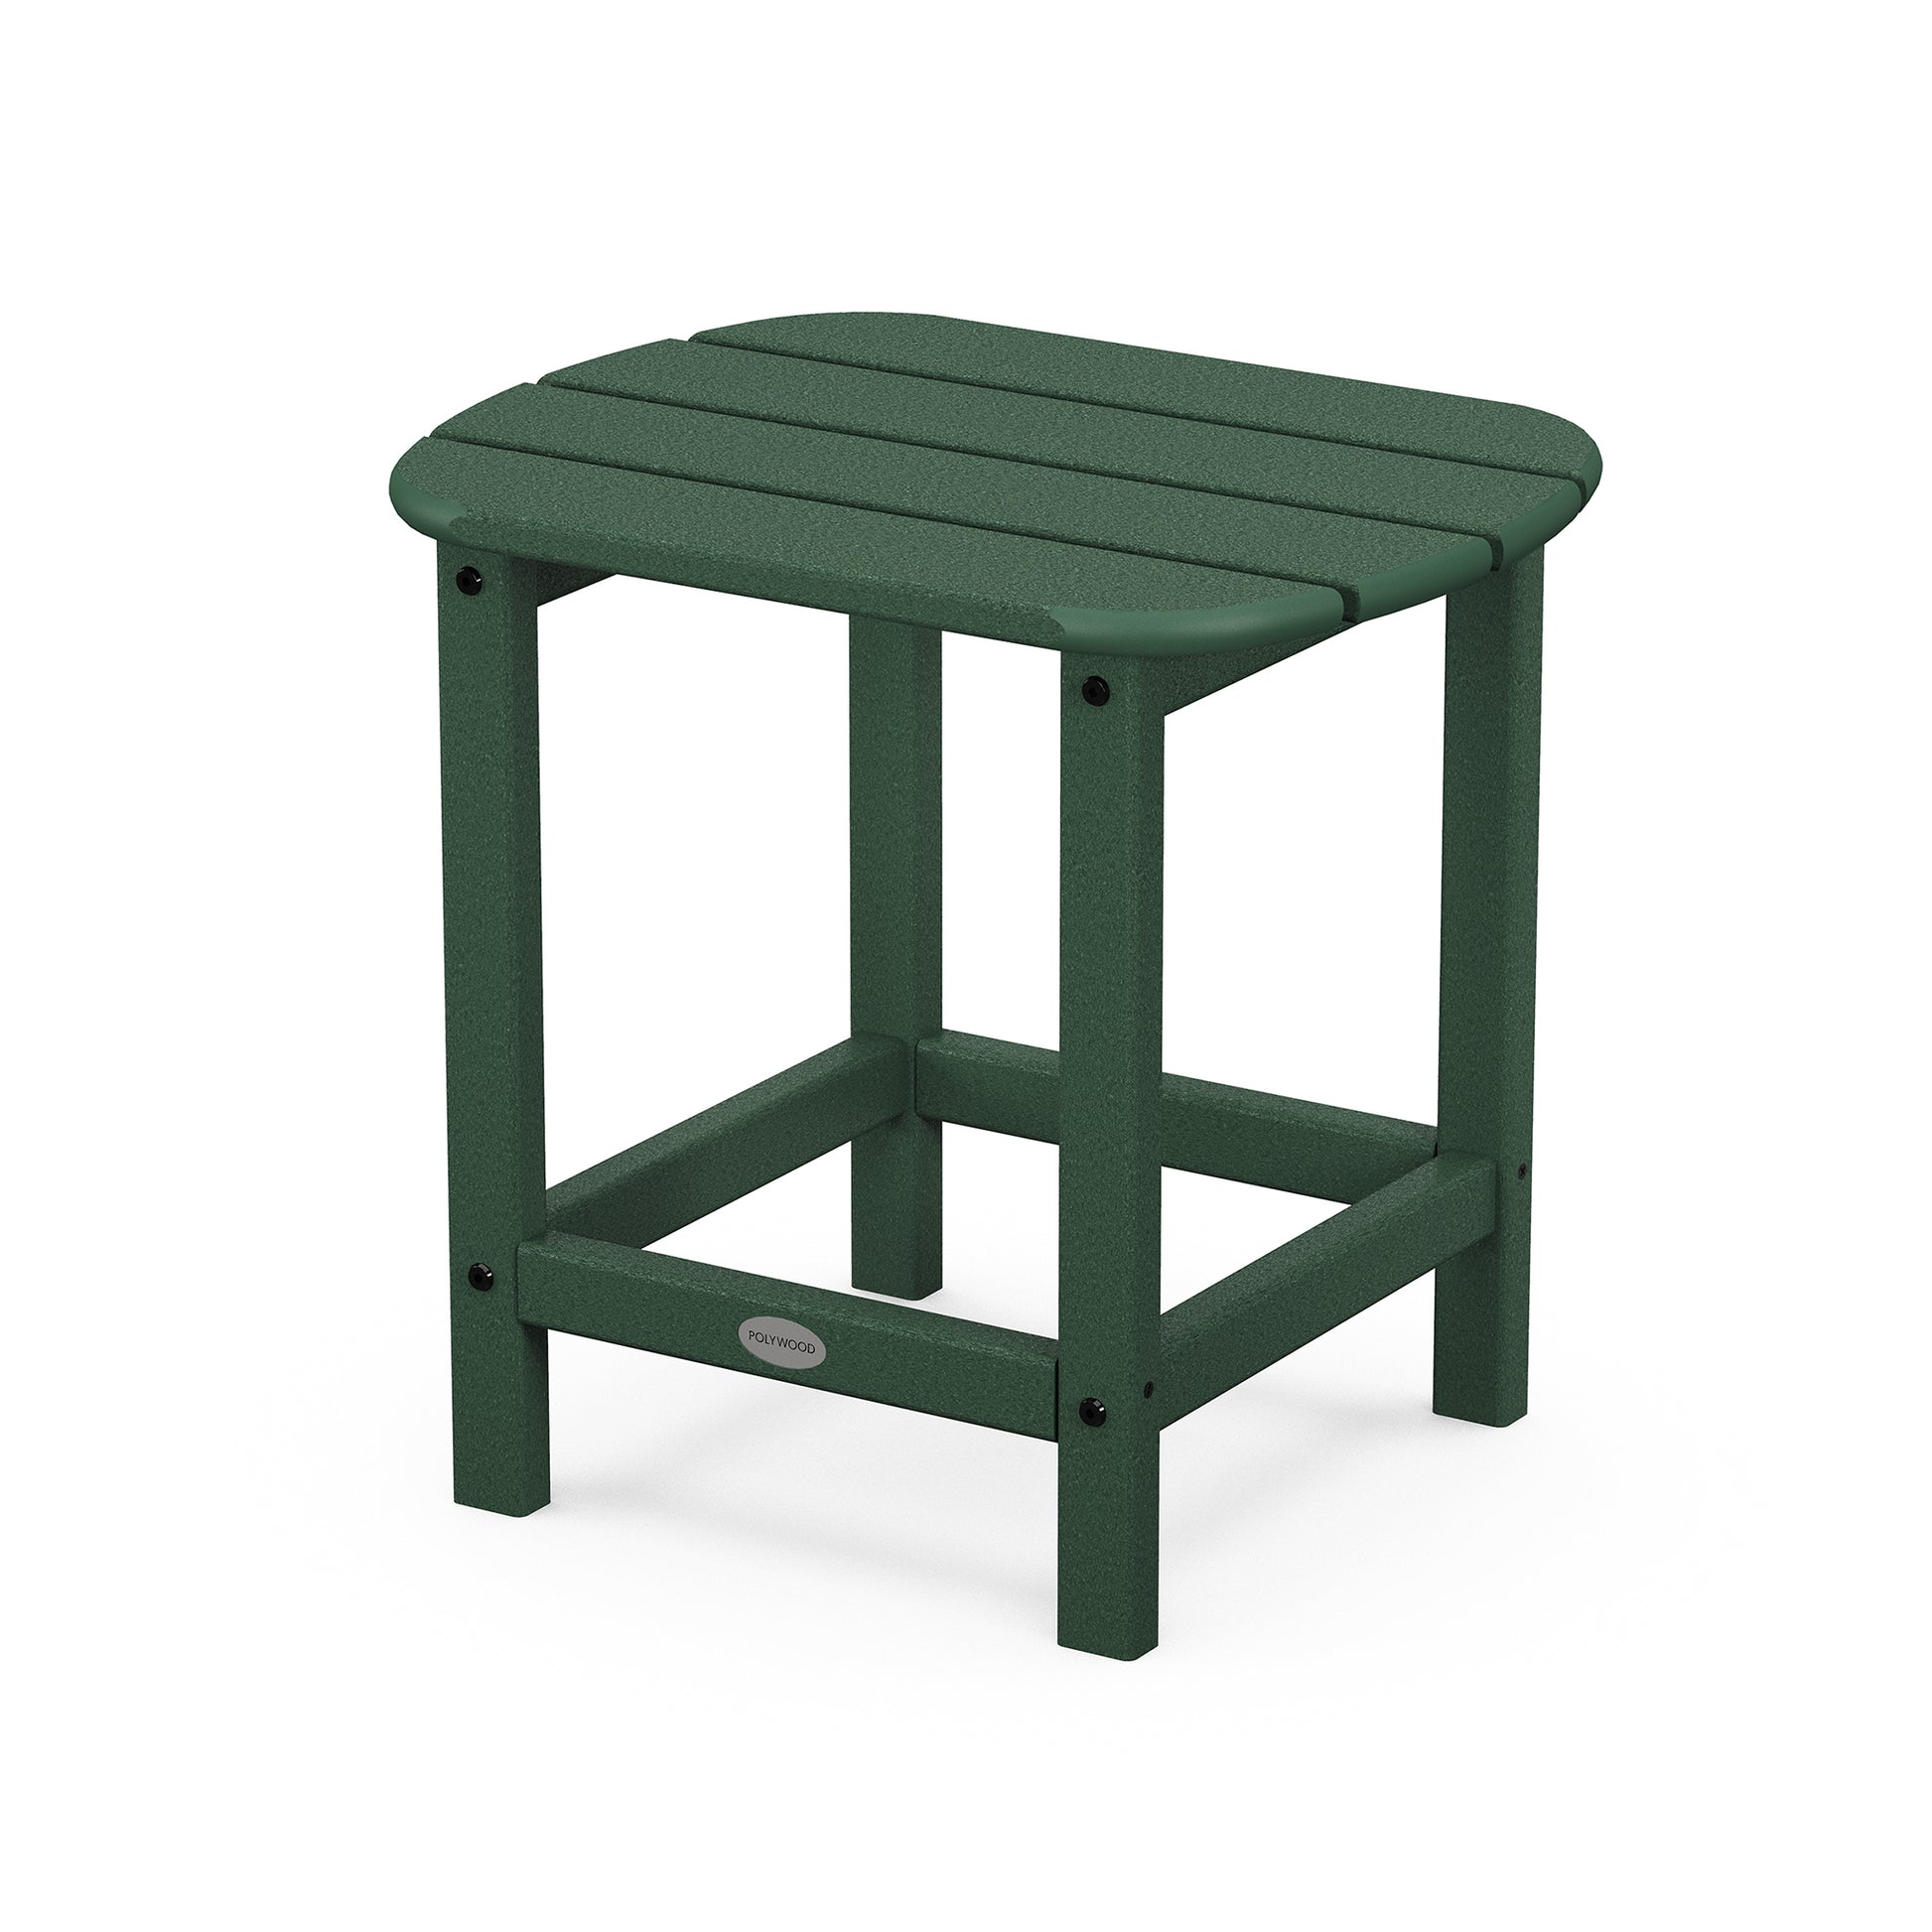 A green, POLYWOOD® South Beach Adirondack 18" Side Table with four sturdy legs and a branded label on the front, isolated on a white background.